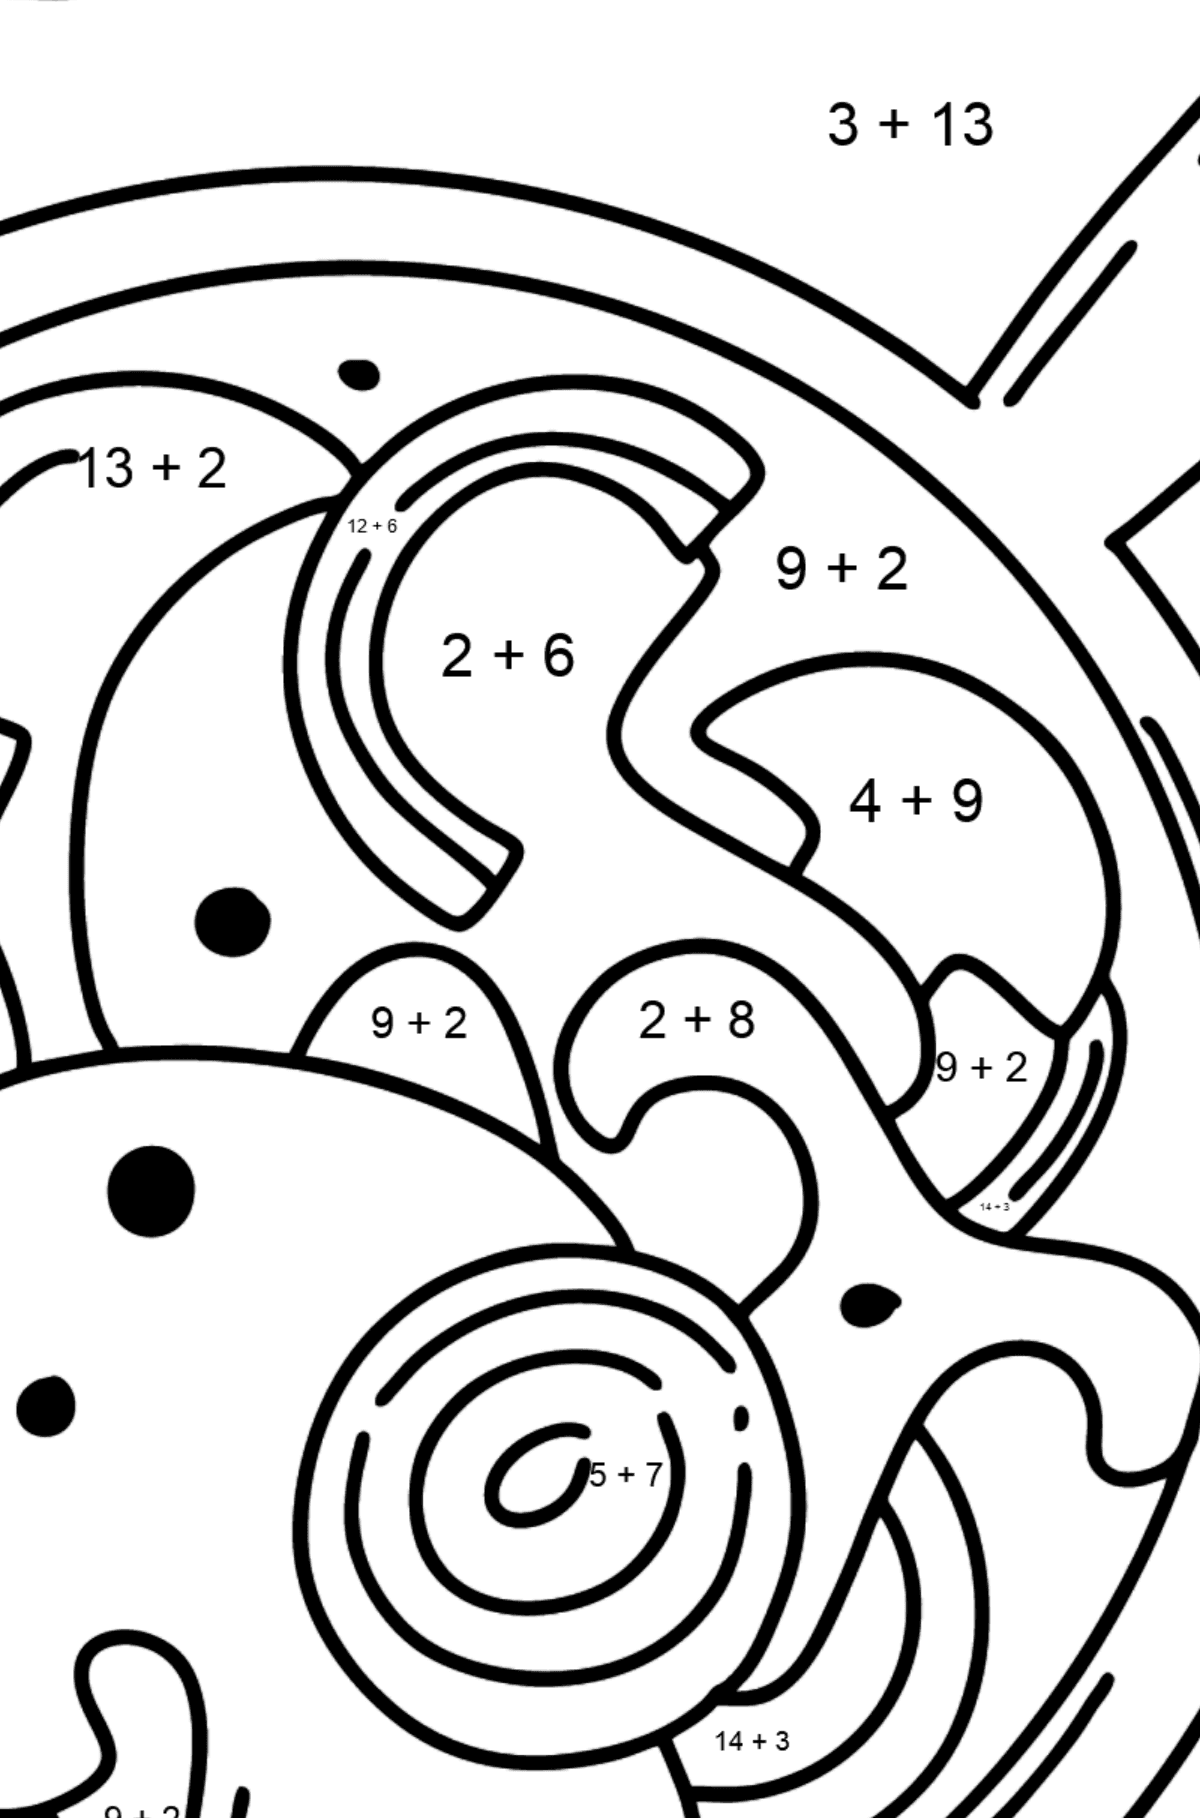 Mushrooms in Creamy Sauce coloring page - Math Coloring - Addition for Kids